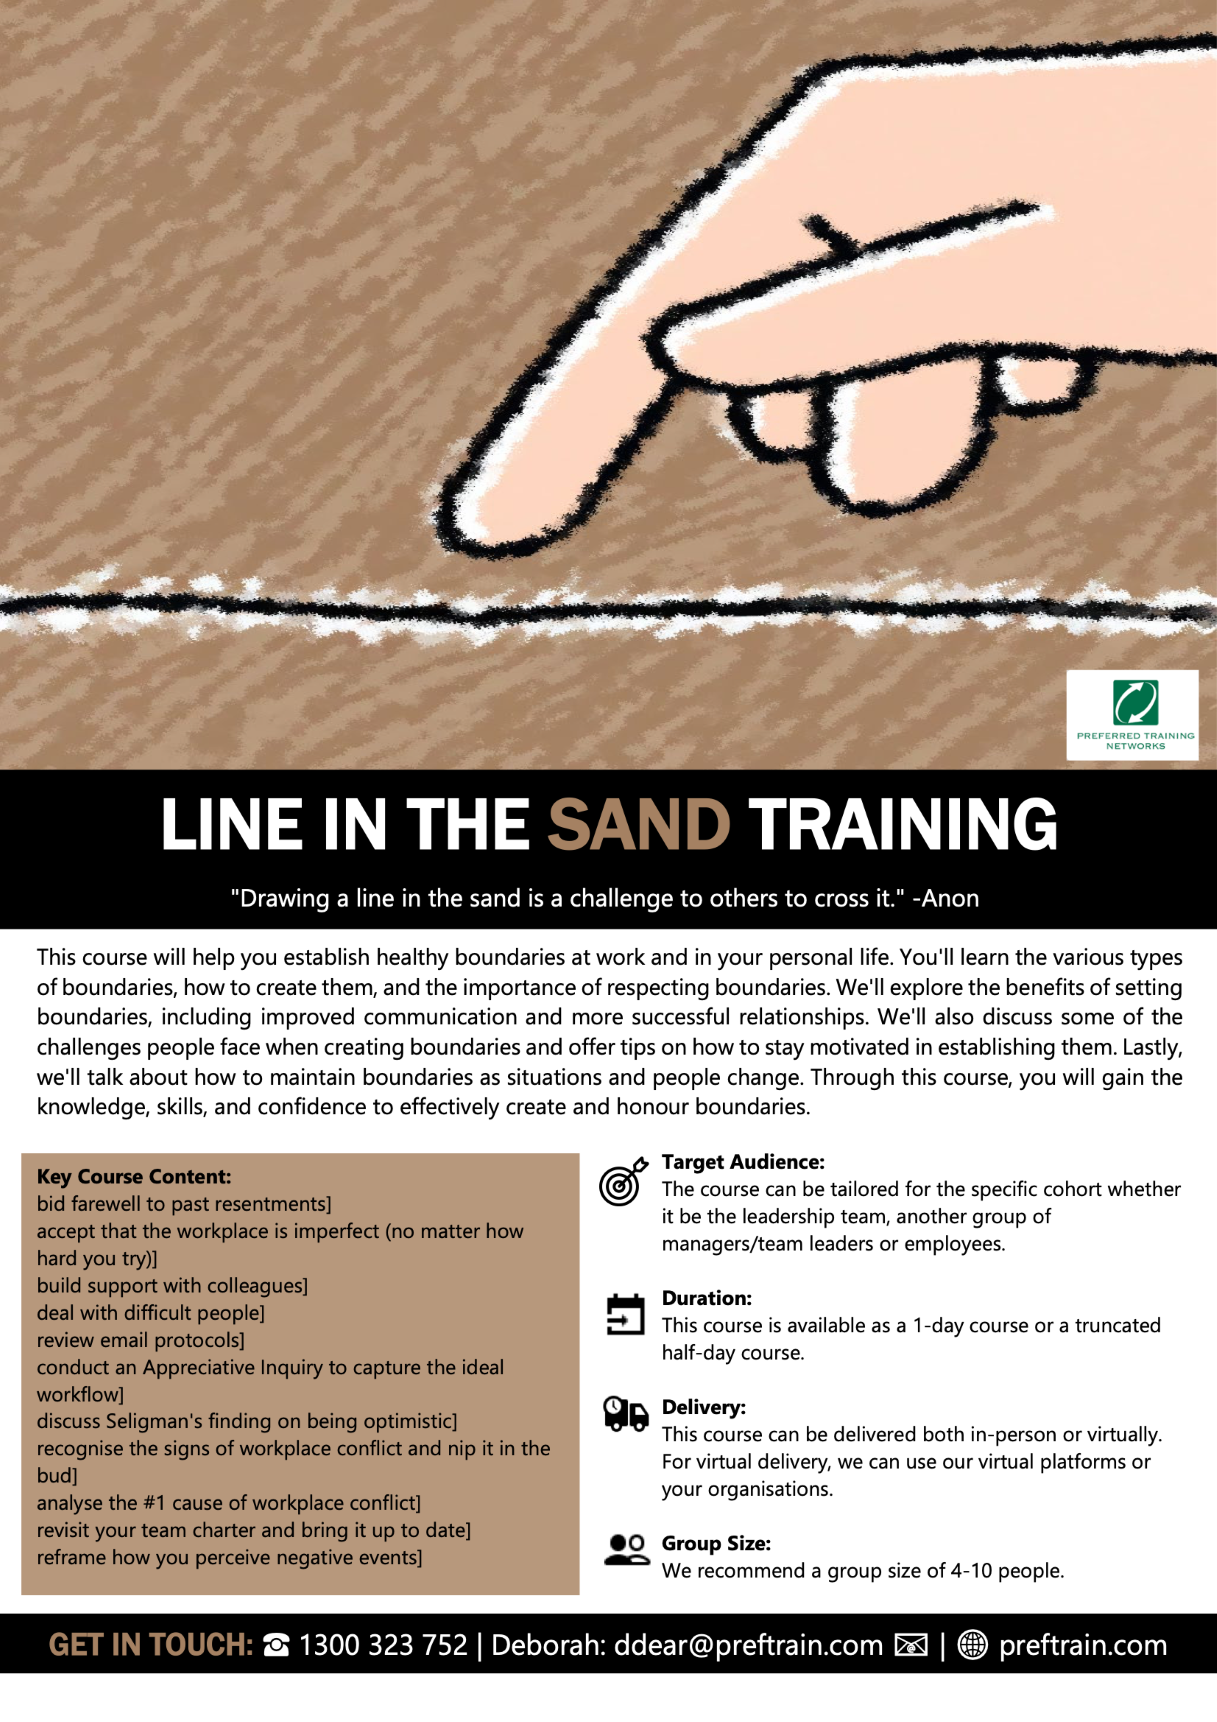 Line in the Sand Training